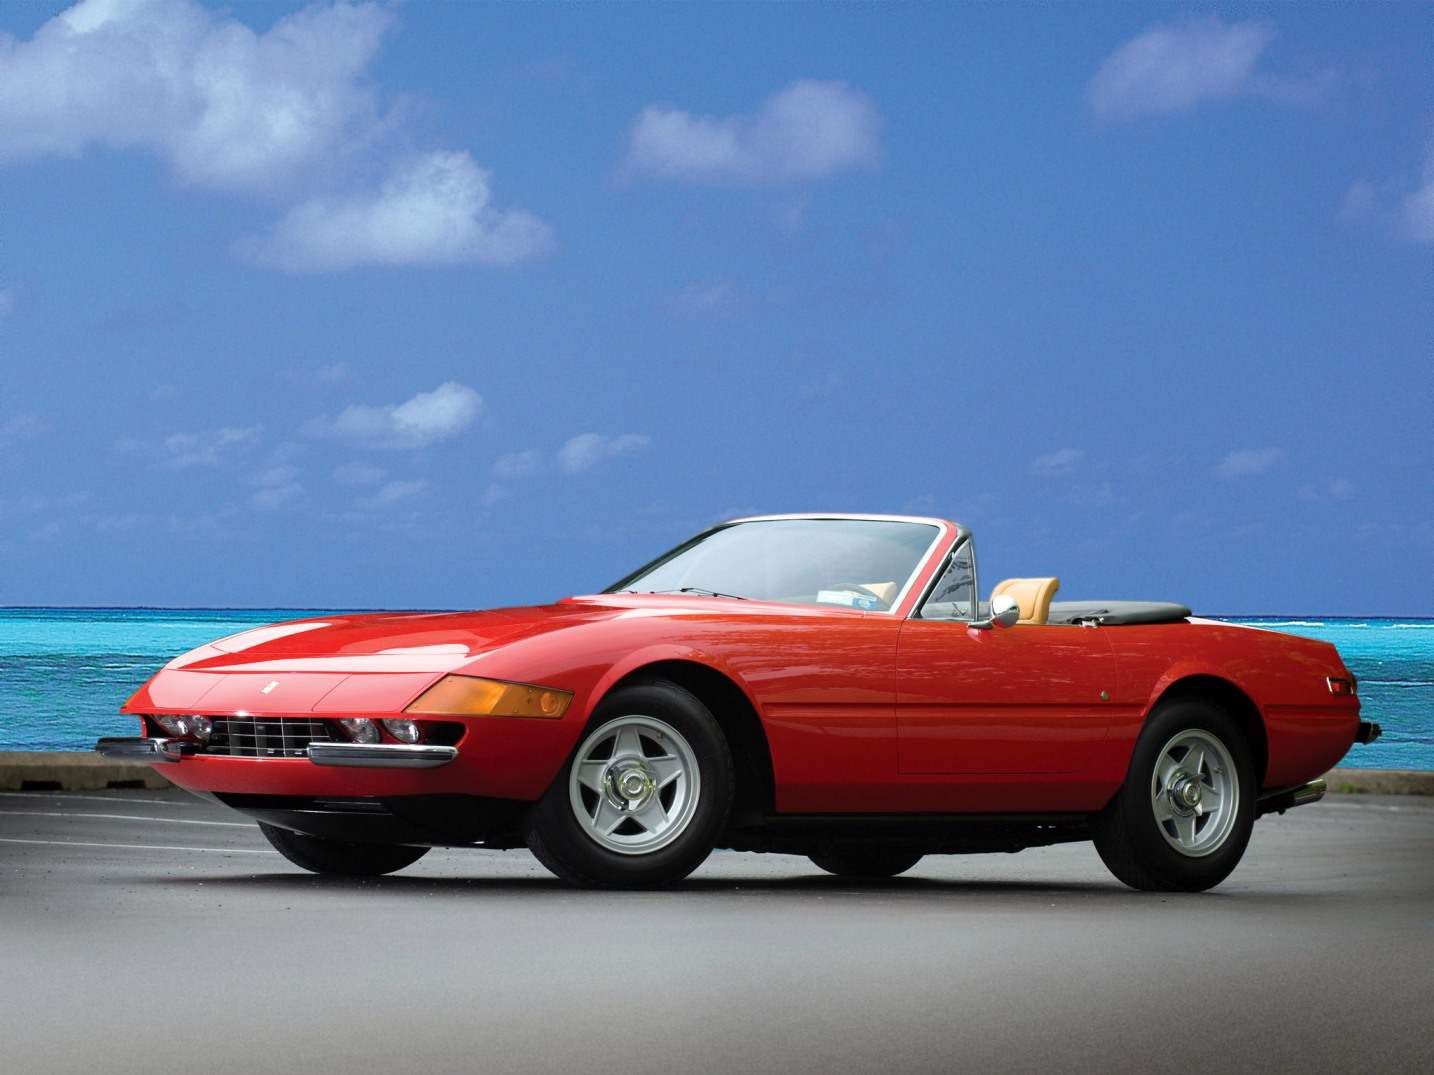 Coupe FERRARI 356GTB/4 DAYTONA convertible FERRARI 365GTS/4 DAYTONA — the first cars with retractable headlights. They were considered the fastest production cars in the world (1970)